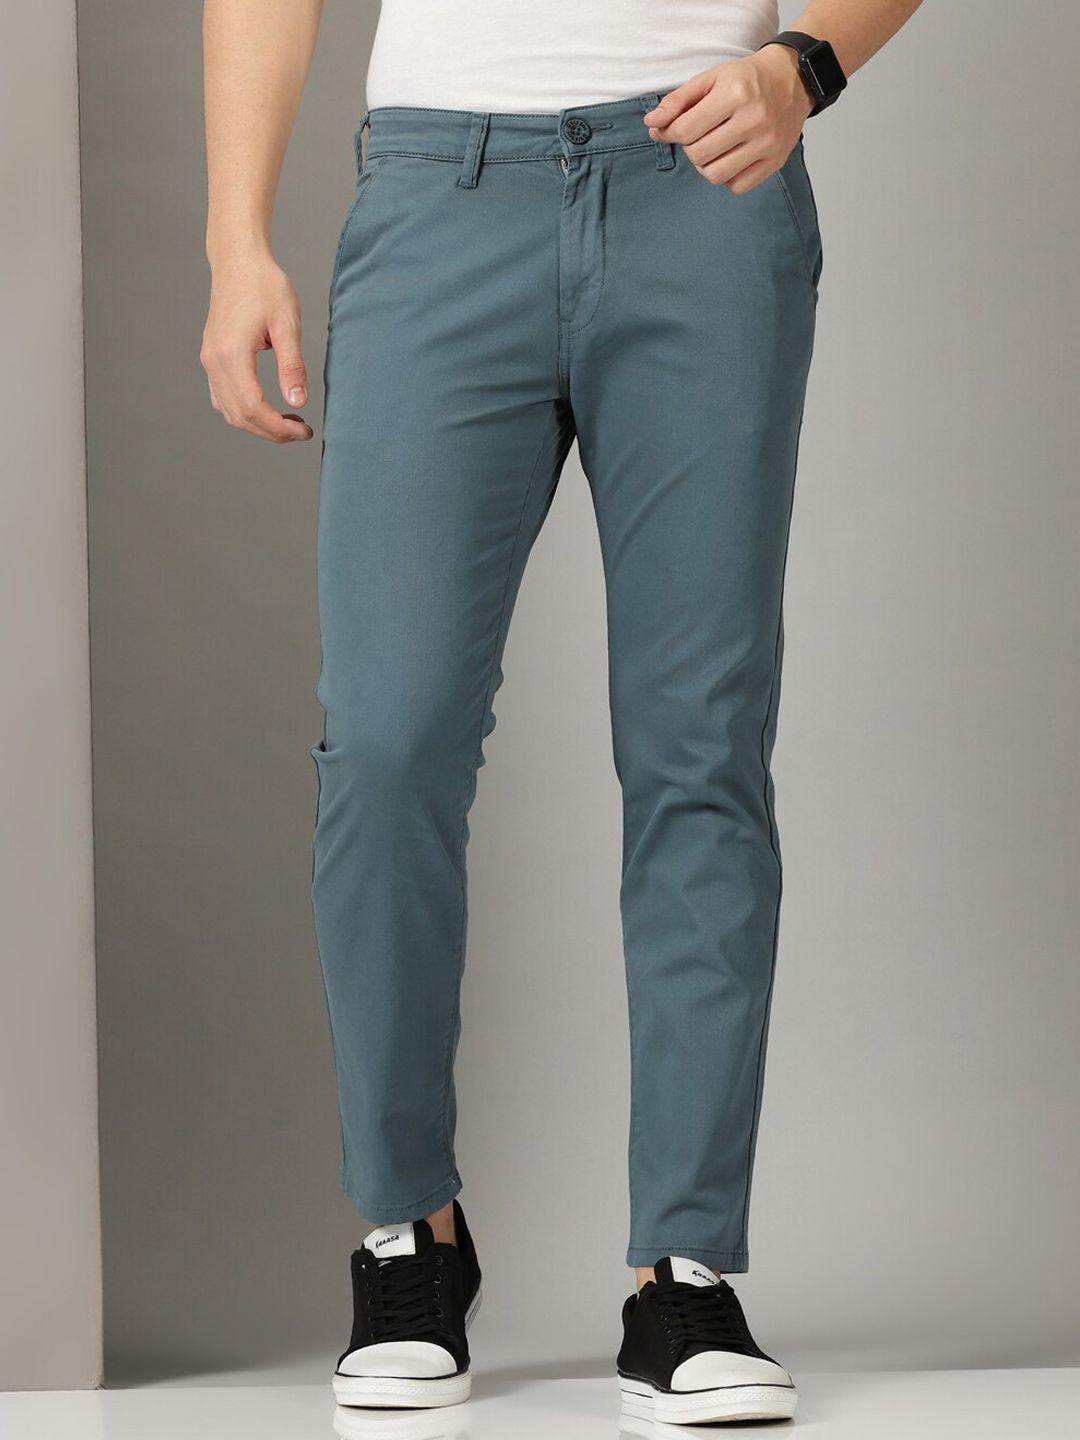 old grey men stretchable relaxed slim fit cotton chinos trousers